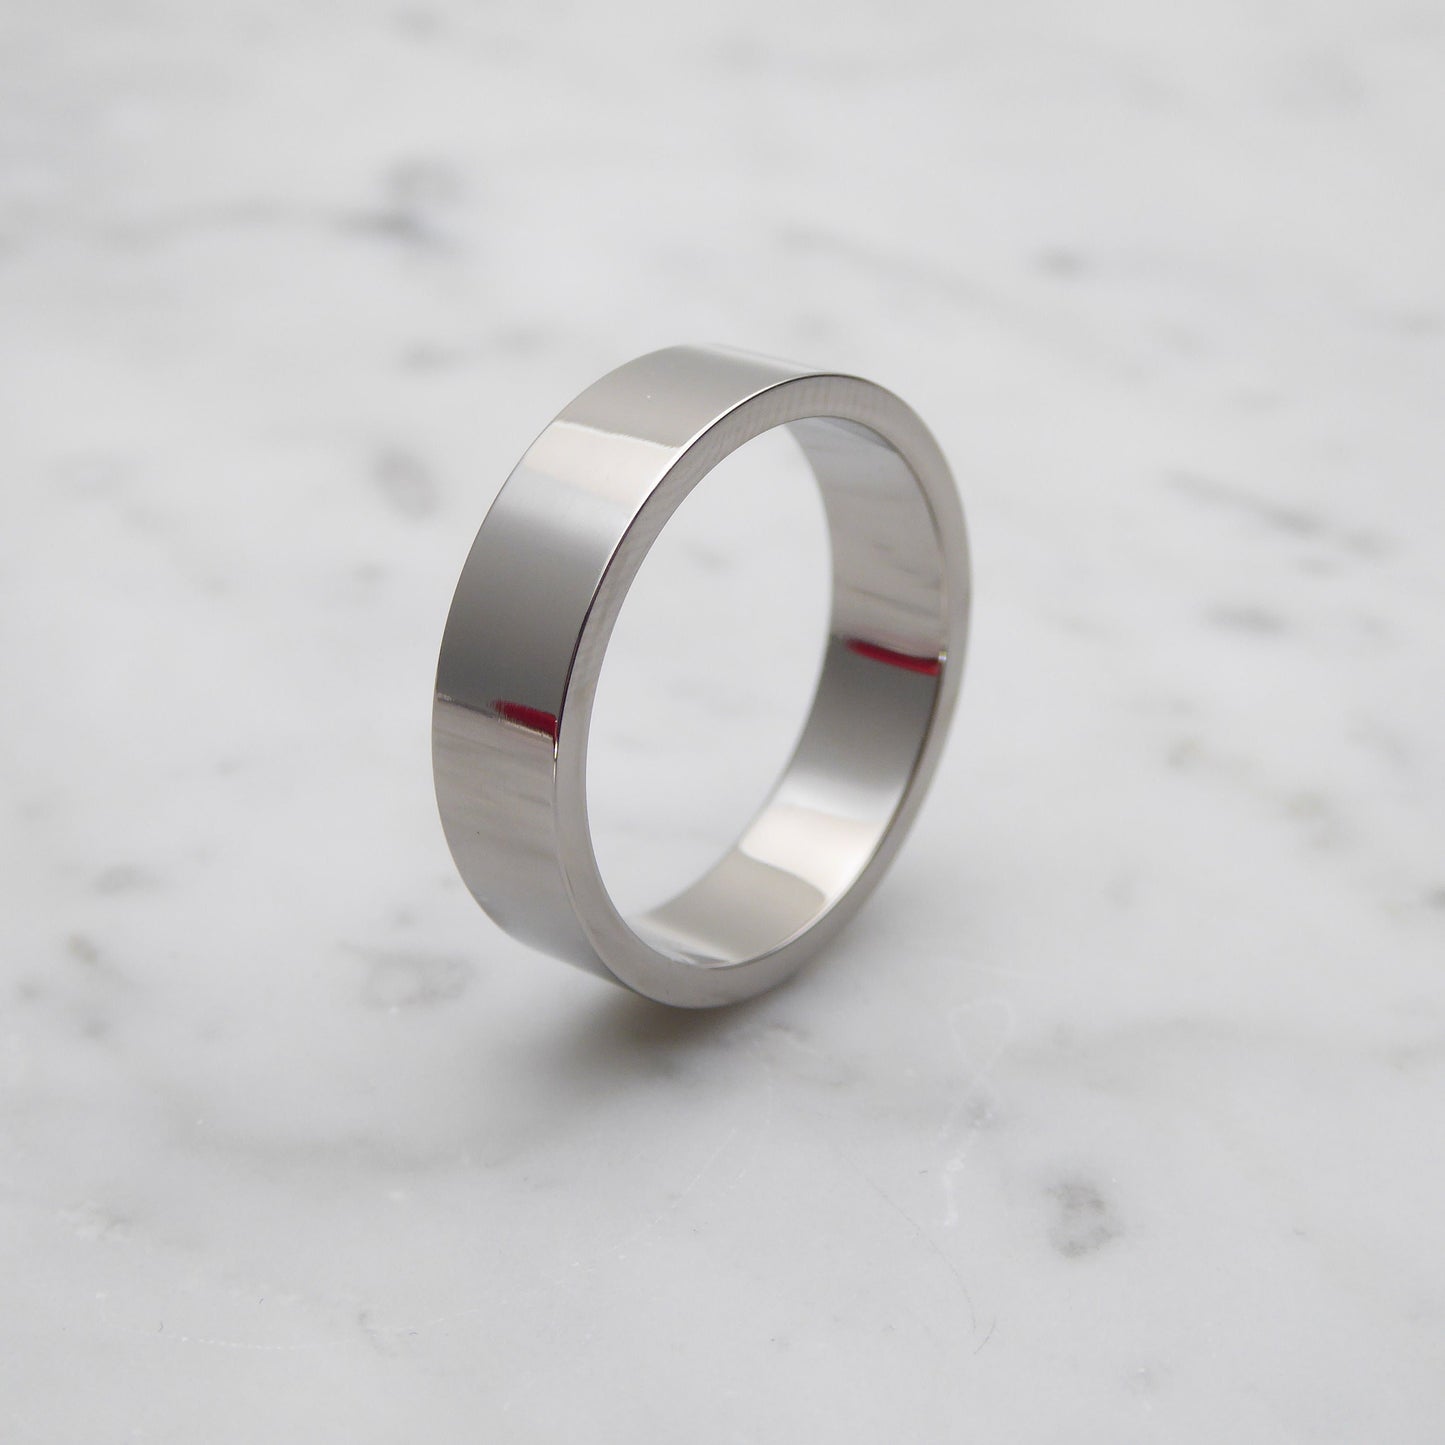 6mm Titanium Flat / Square Mens / Womens Plain band Wedding Ring - Available in polished and brushed finishes